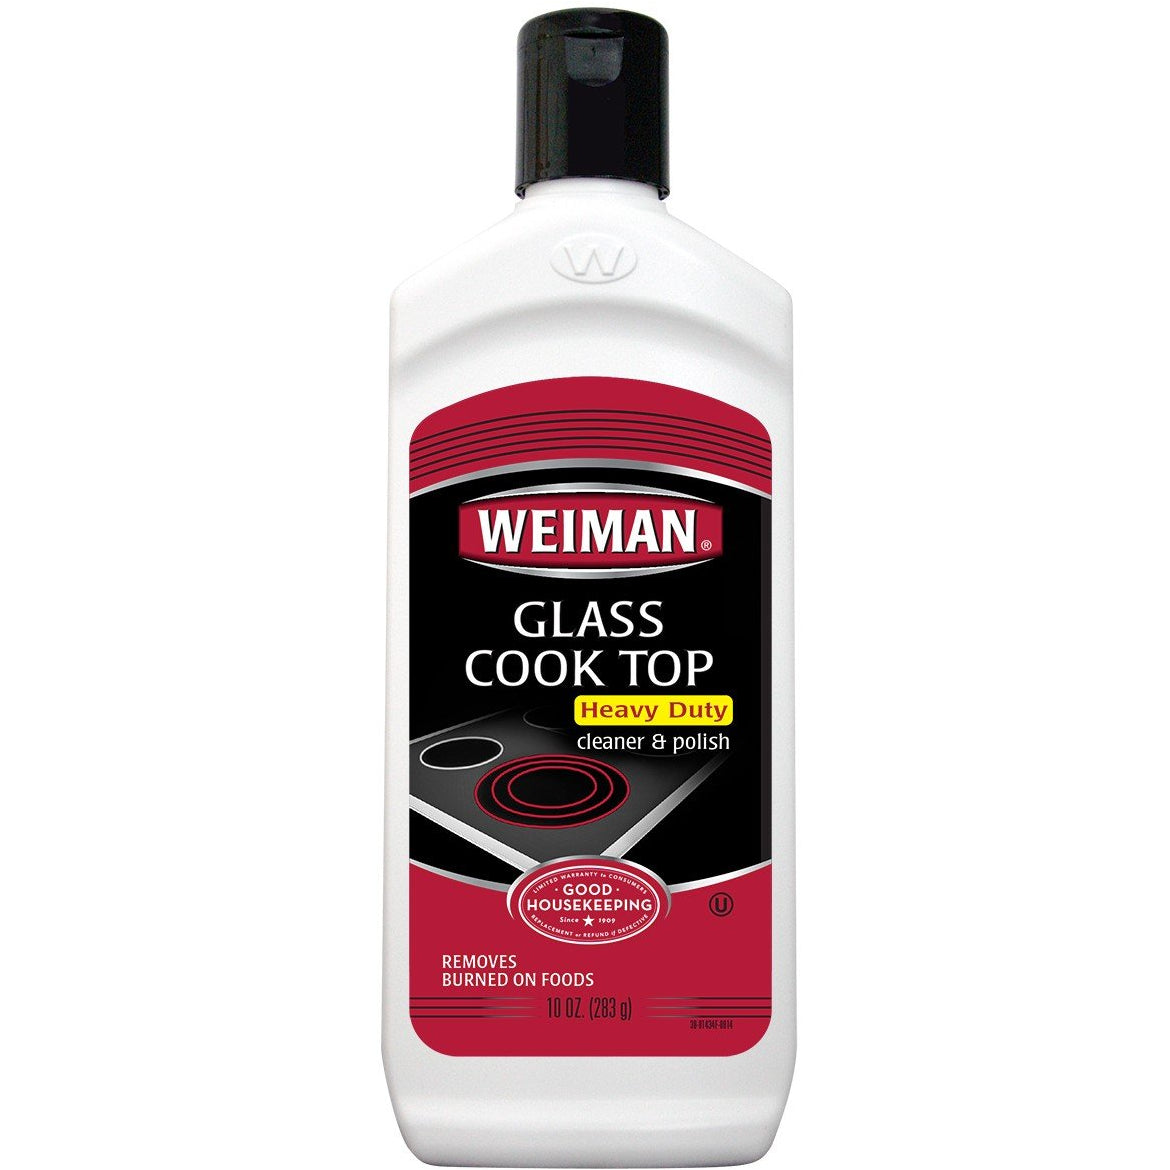 Weiman Glass Cook Top Heavy Duty Cleaner & Polish, 10 Oz